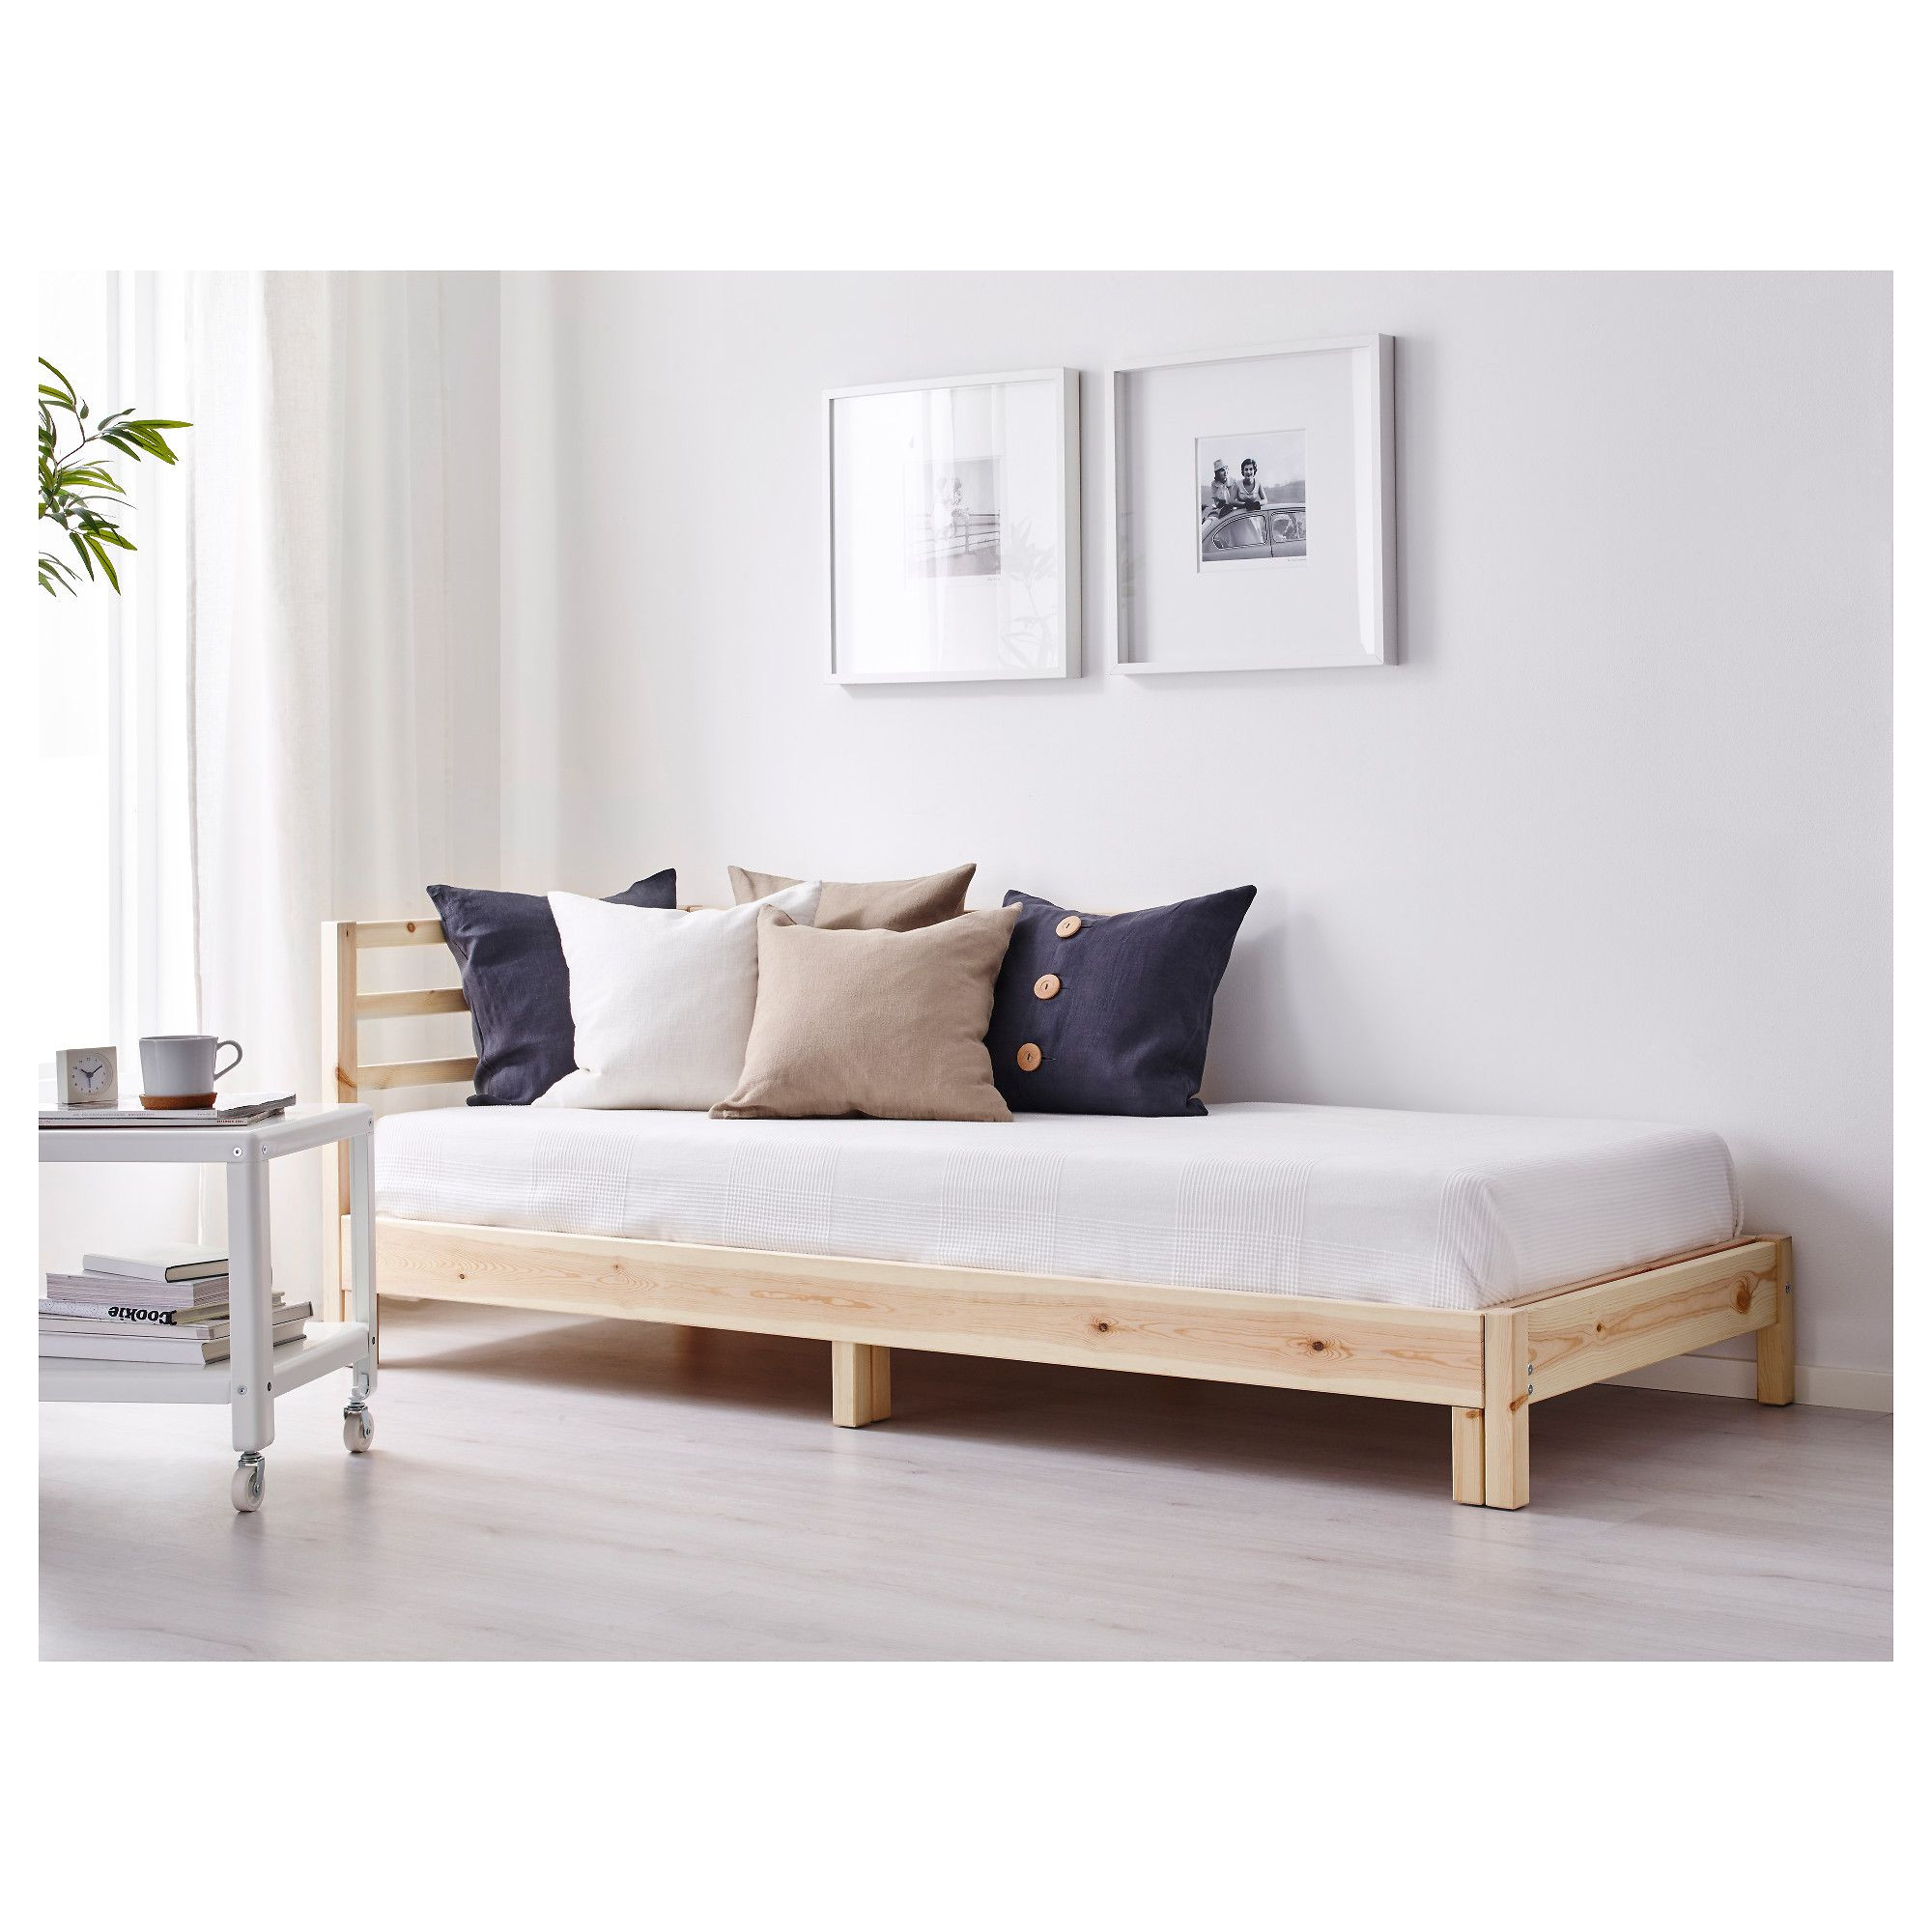 ikea tarva day bed with 2 mattresses two functions in one chaise longue by day and bed by night